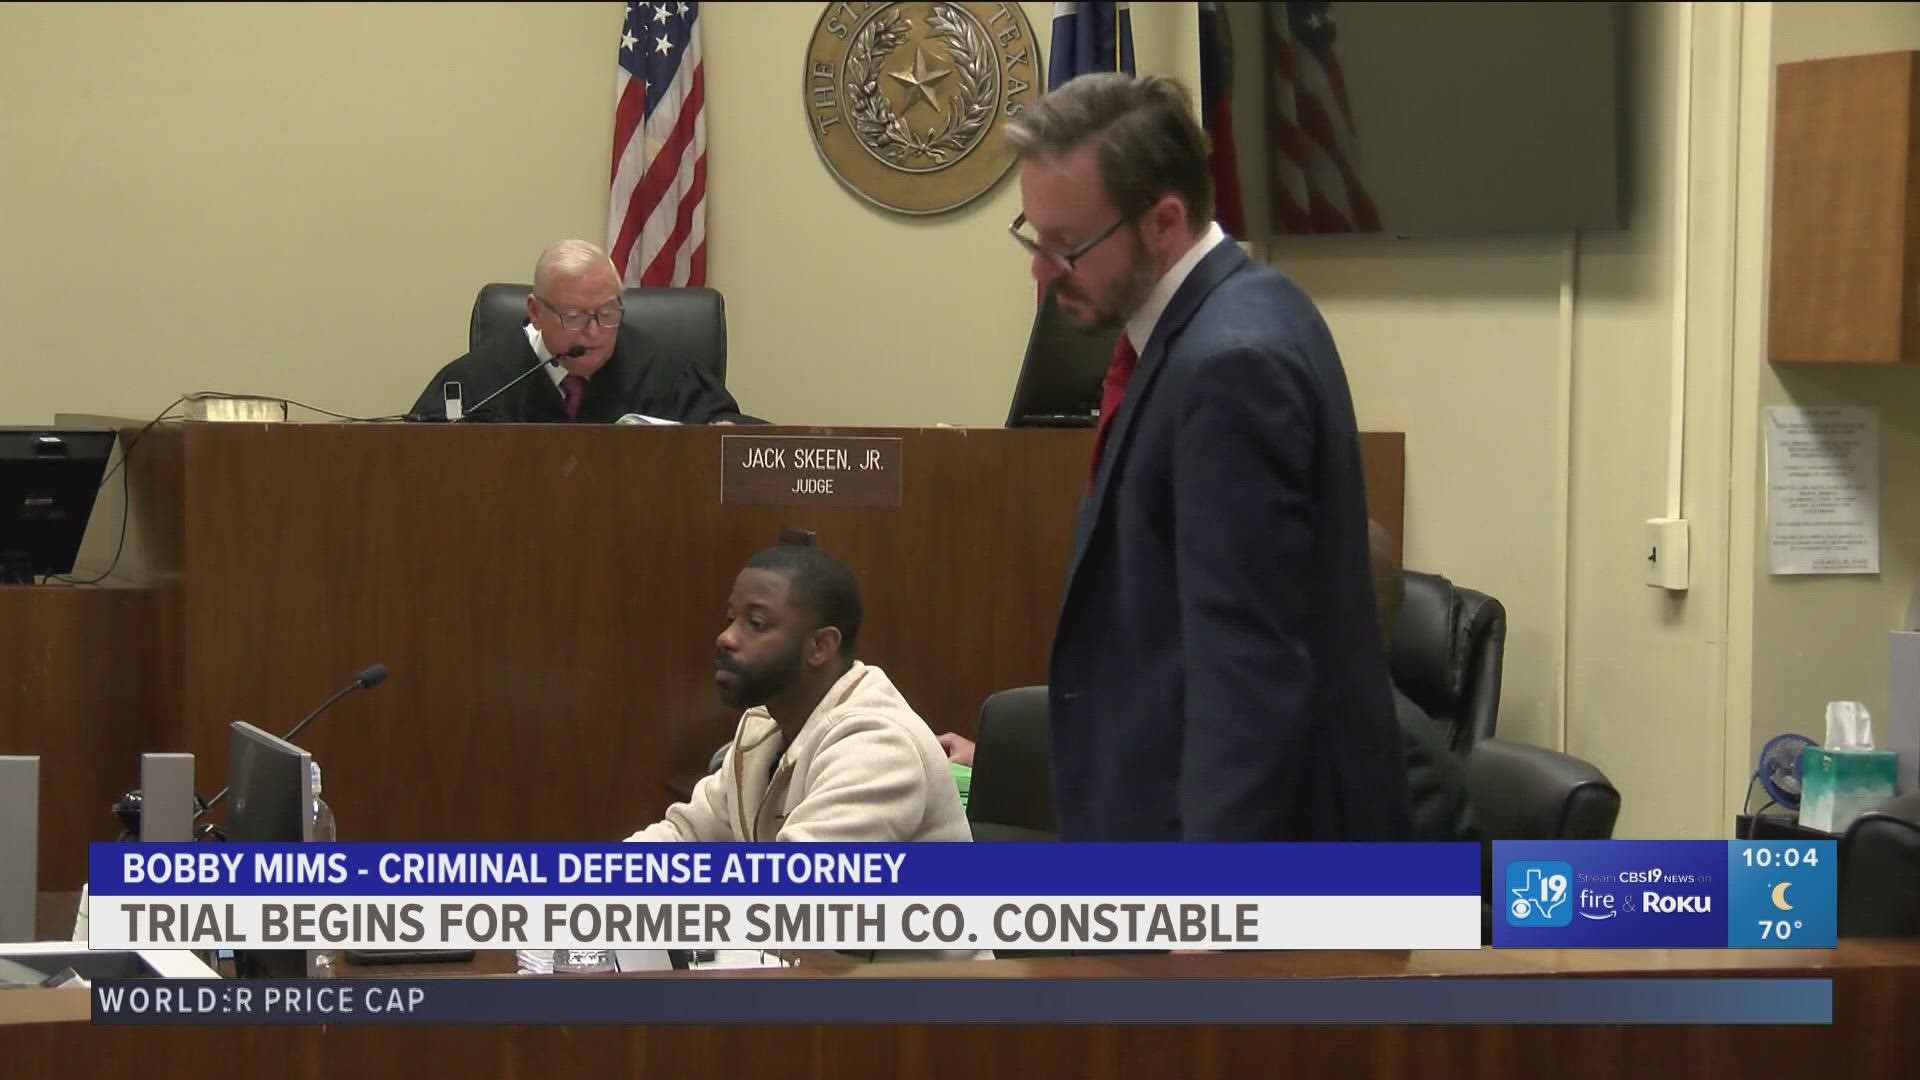 Trial begins for former Smith Co. Constable Curtis Traylor-Harris